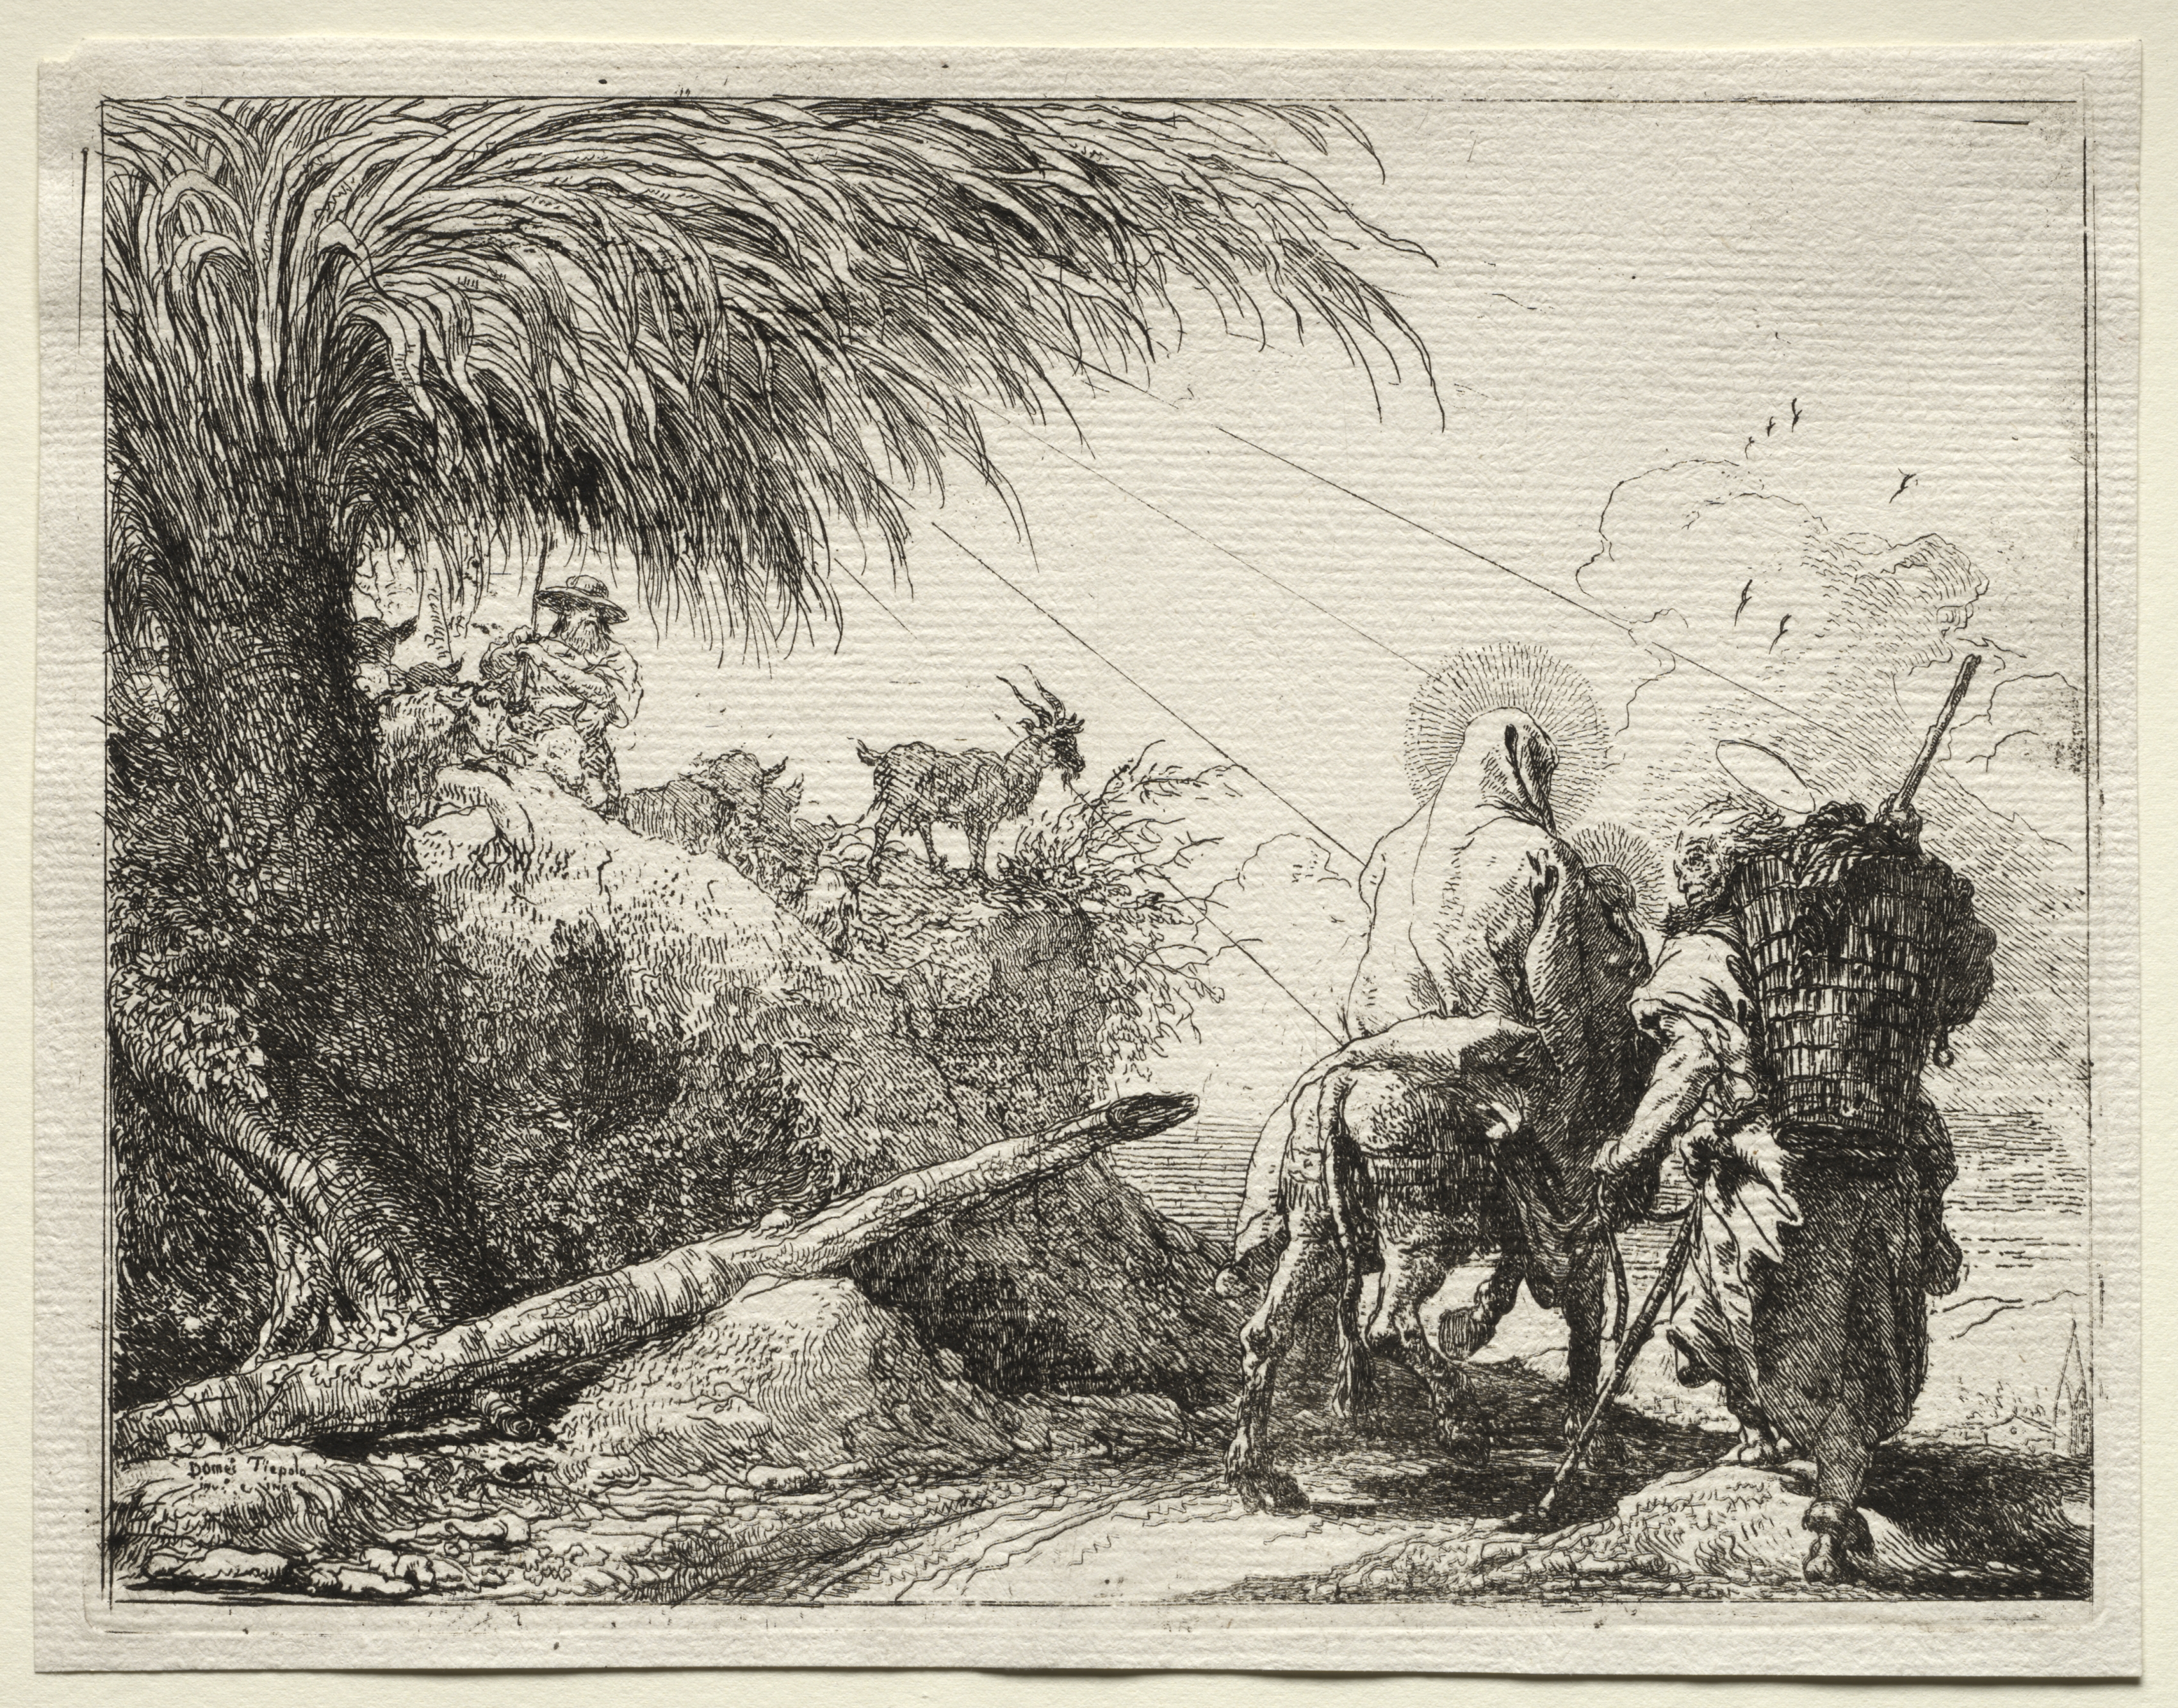 Flight into Egypt:  The Holy Family and the Palm Tree